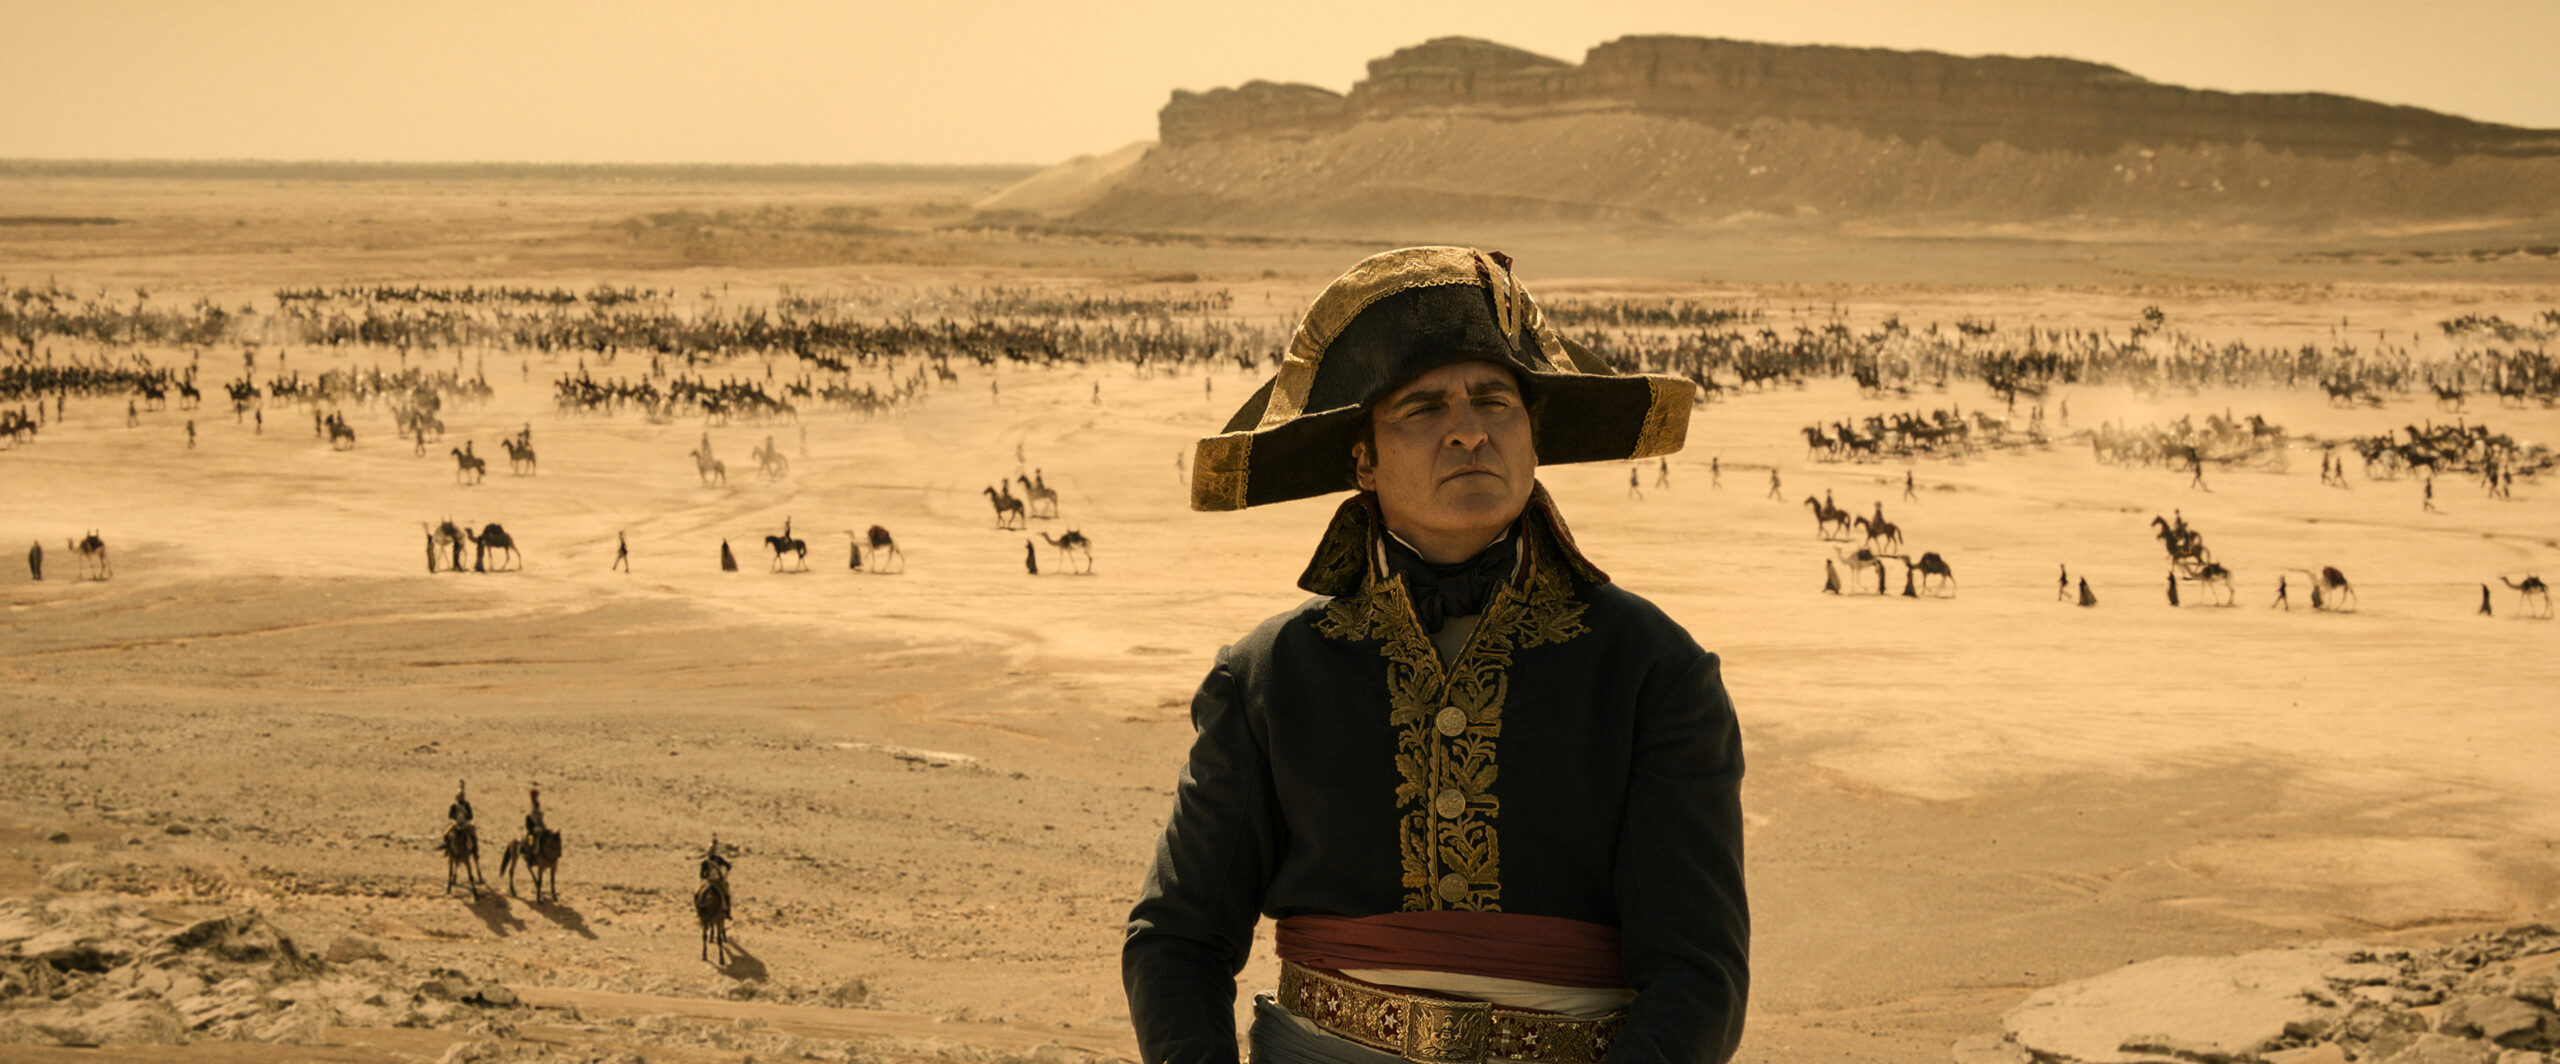 Joaquin Phoenix as Napoleon Bonaparte stands in a desert with an army on horseback in the background.